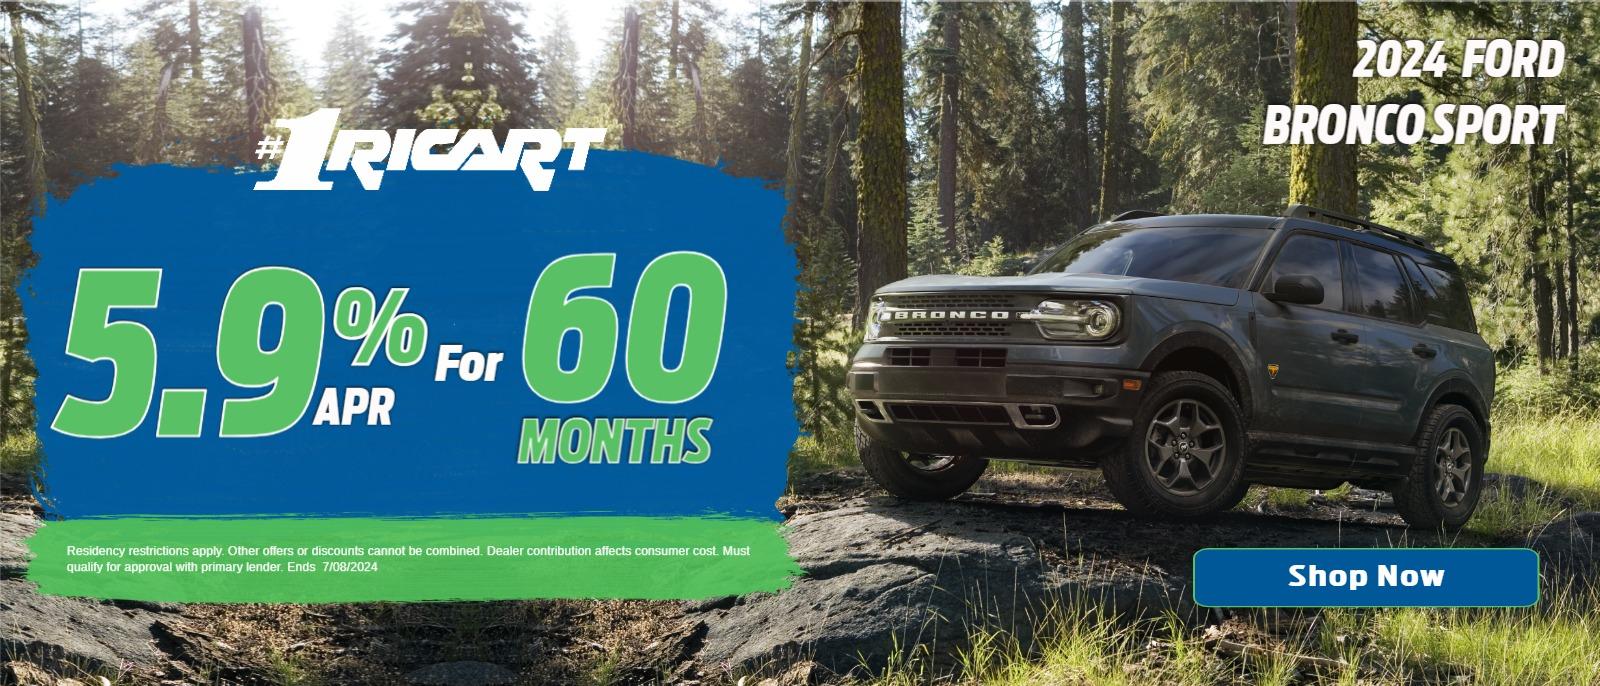 2024 Ford Bronco Sport - 5.9% APR For 60 Months